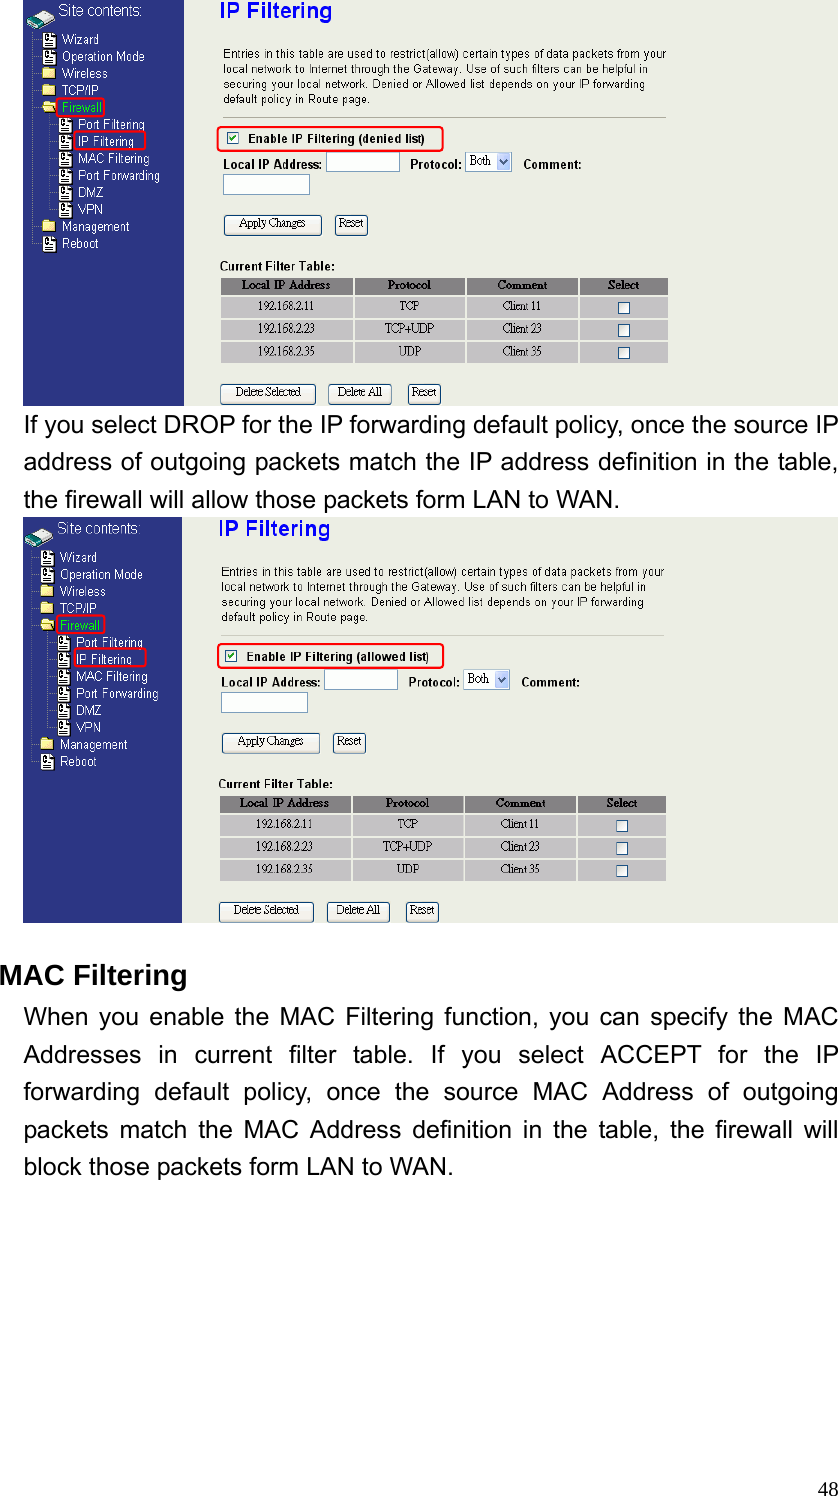  48 If you select DROP for the IP forwarding default policy, once the source IP address of outgoing packets match the IP address definition in the table, the firewall will allow those packets form LAN to WAN.   MAC Filtering When you enable the MAC Filtering function, you can specify the MAC Addresses in current filter table. If you select ACCEPT for the IP forwarding default policy, once the source MAC Address of outgoing packets match the MAC Address definition in the table, the firewall will block those packets form LAN to WAN. 